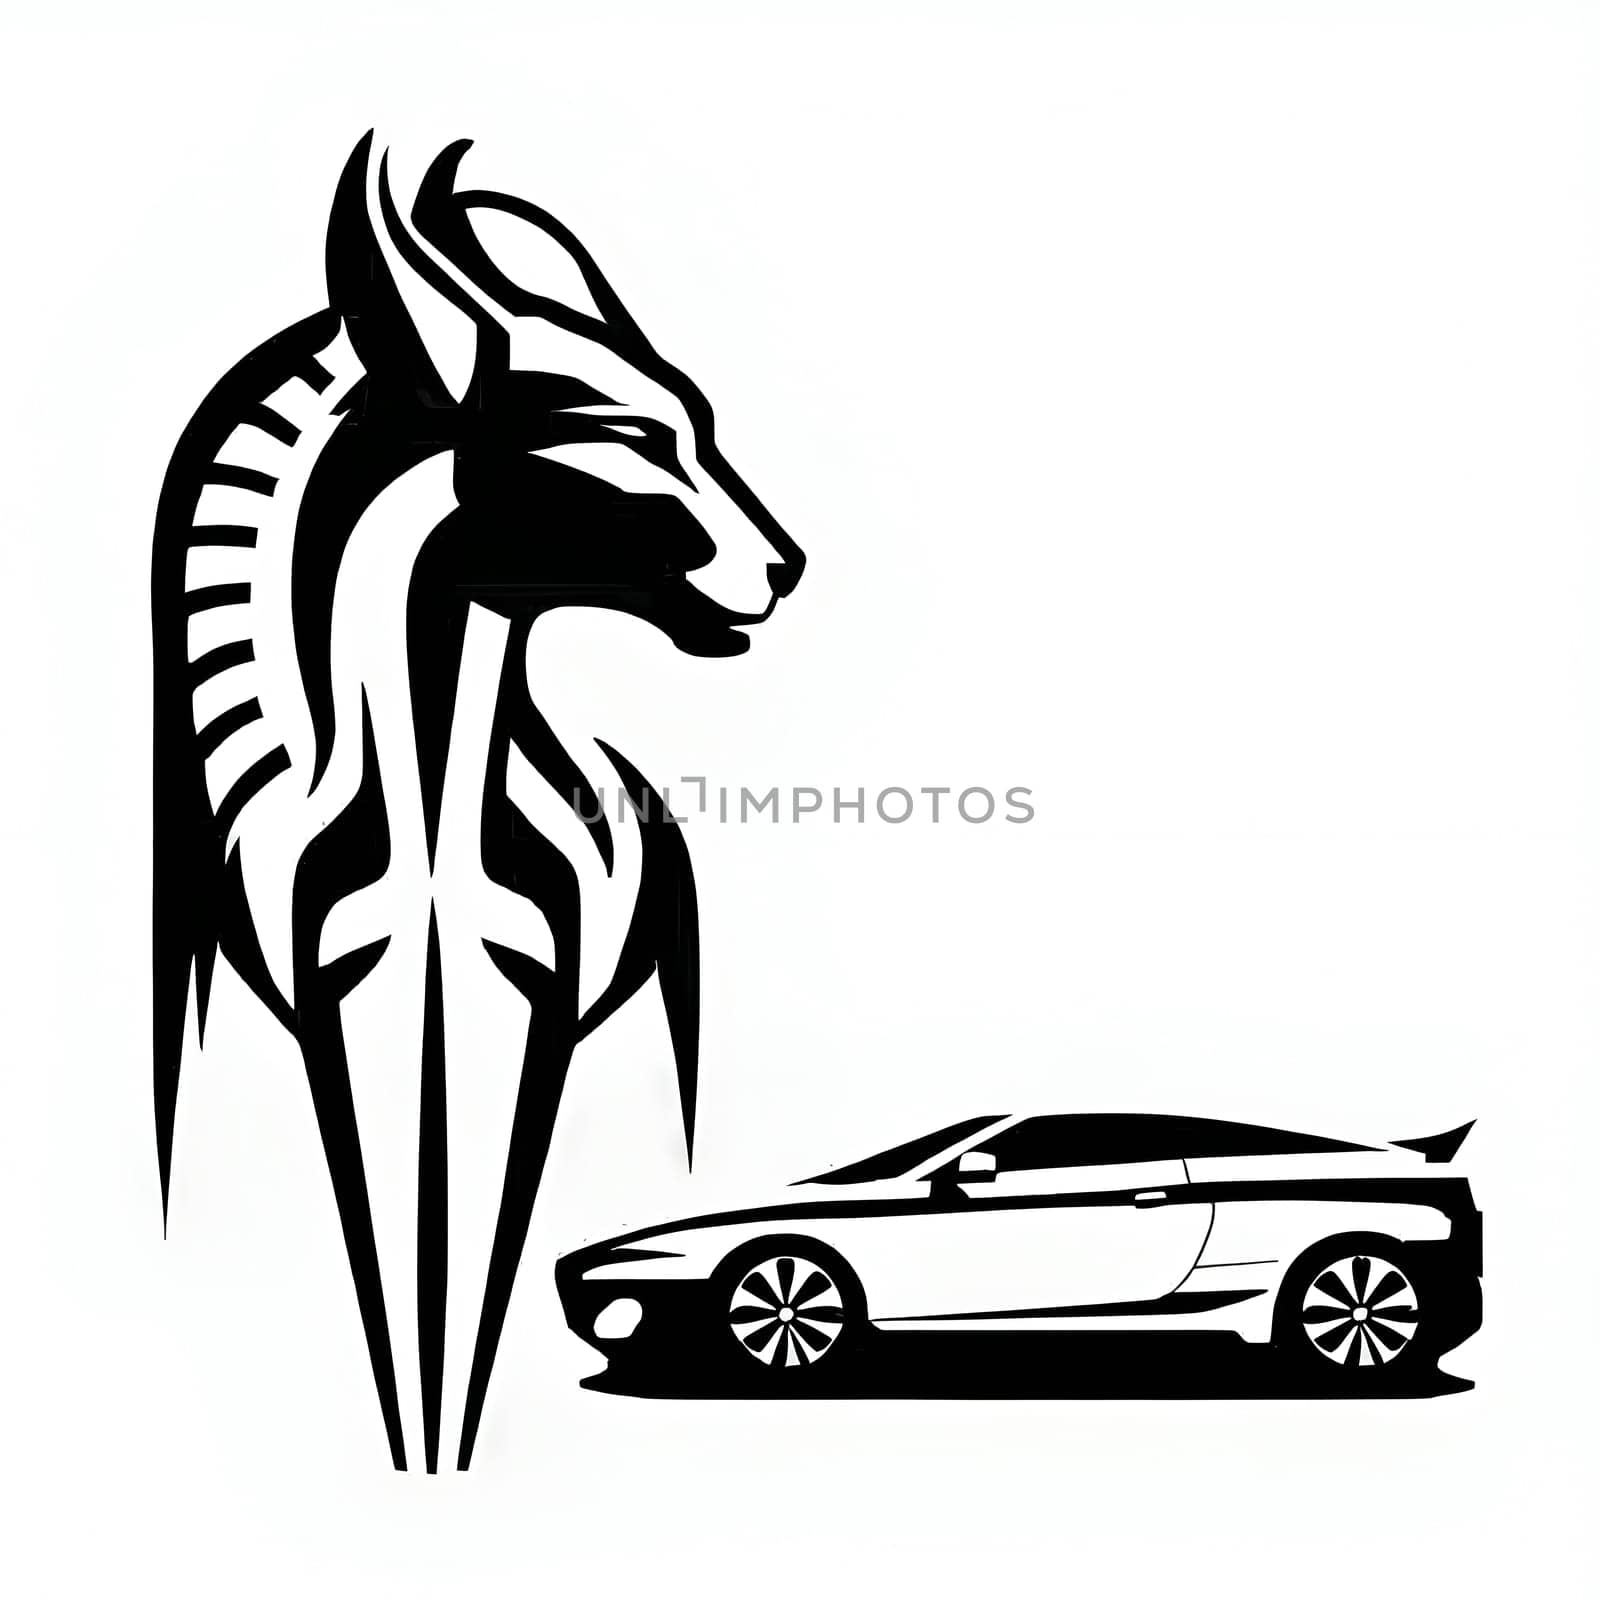 Vector illustration of horse and car in black silhouette against a clean white background, capturing graceful forms.